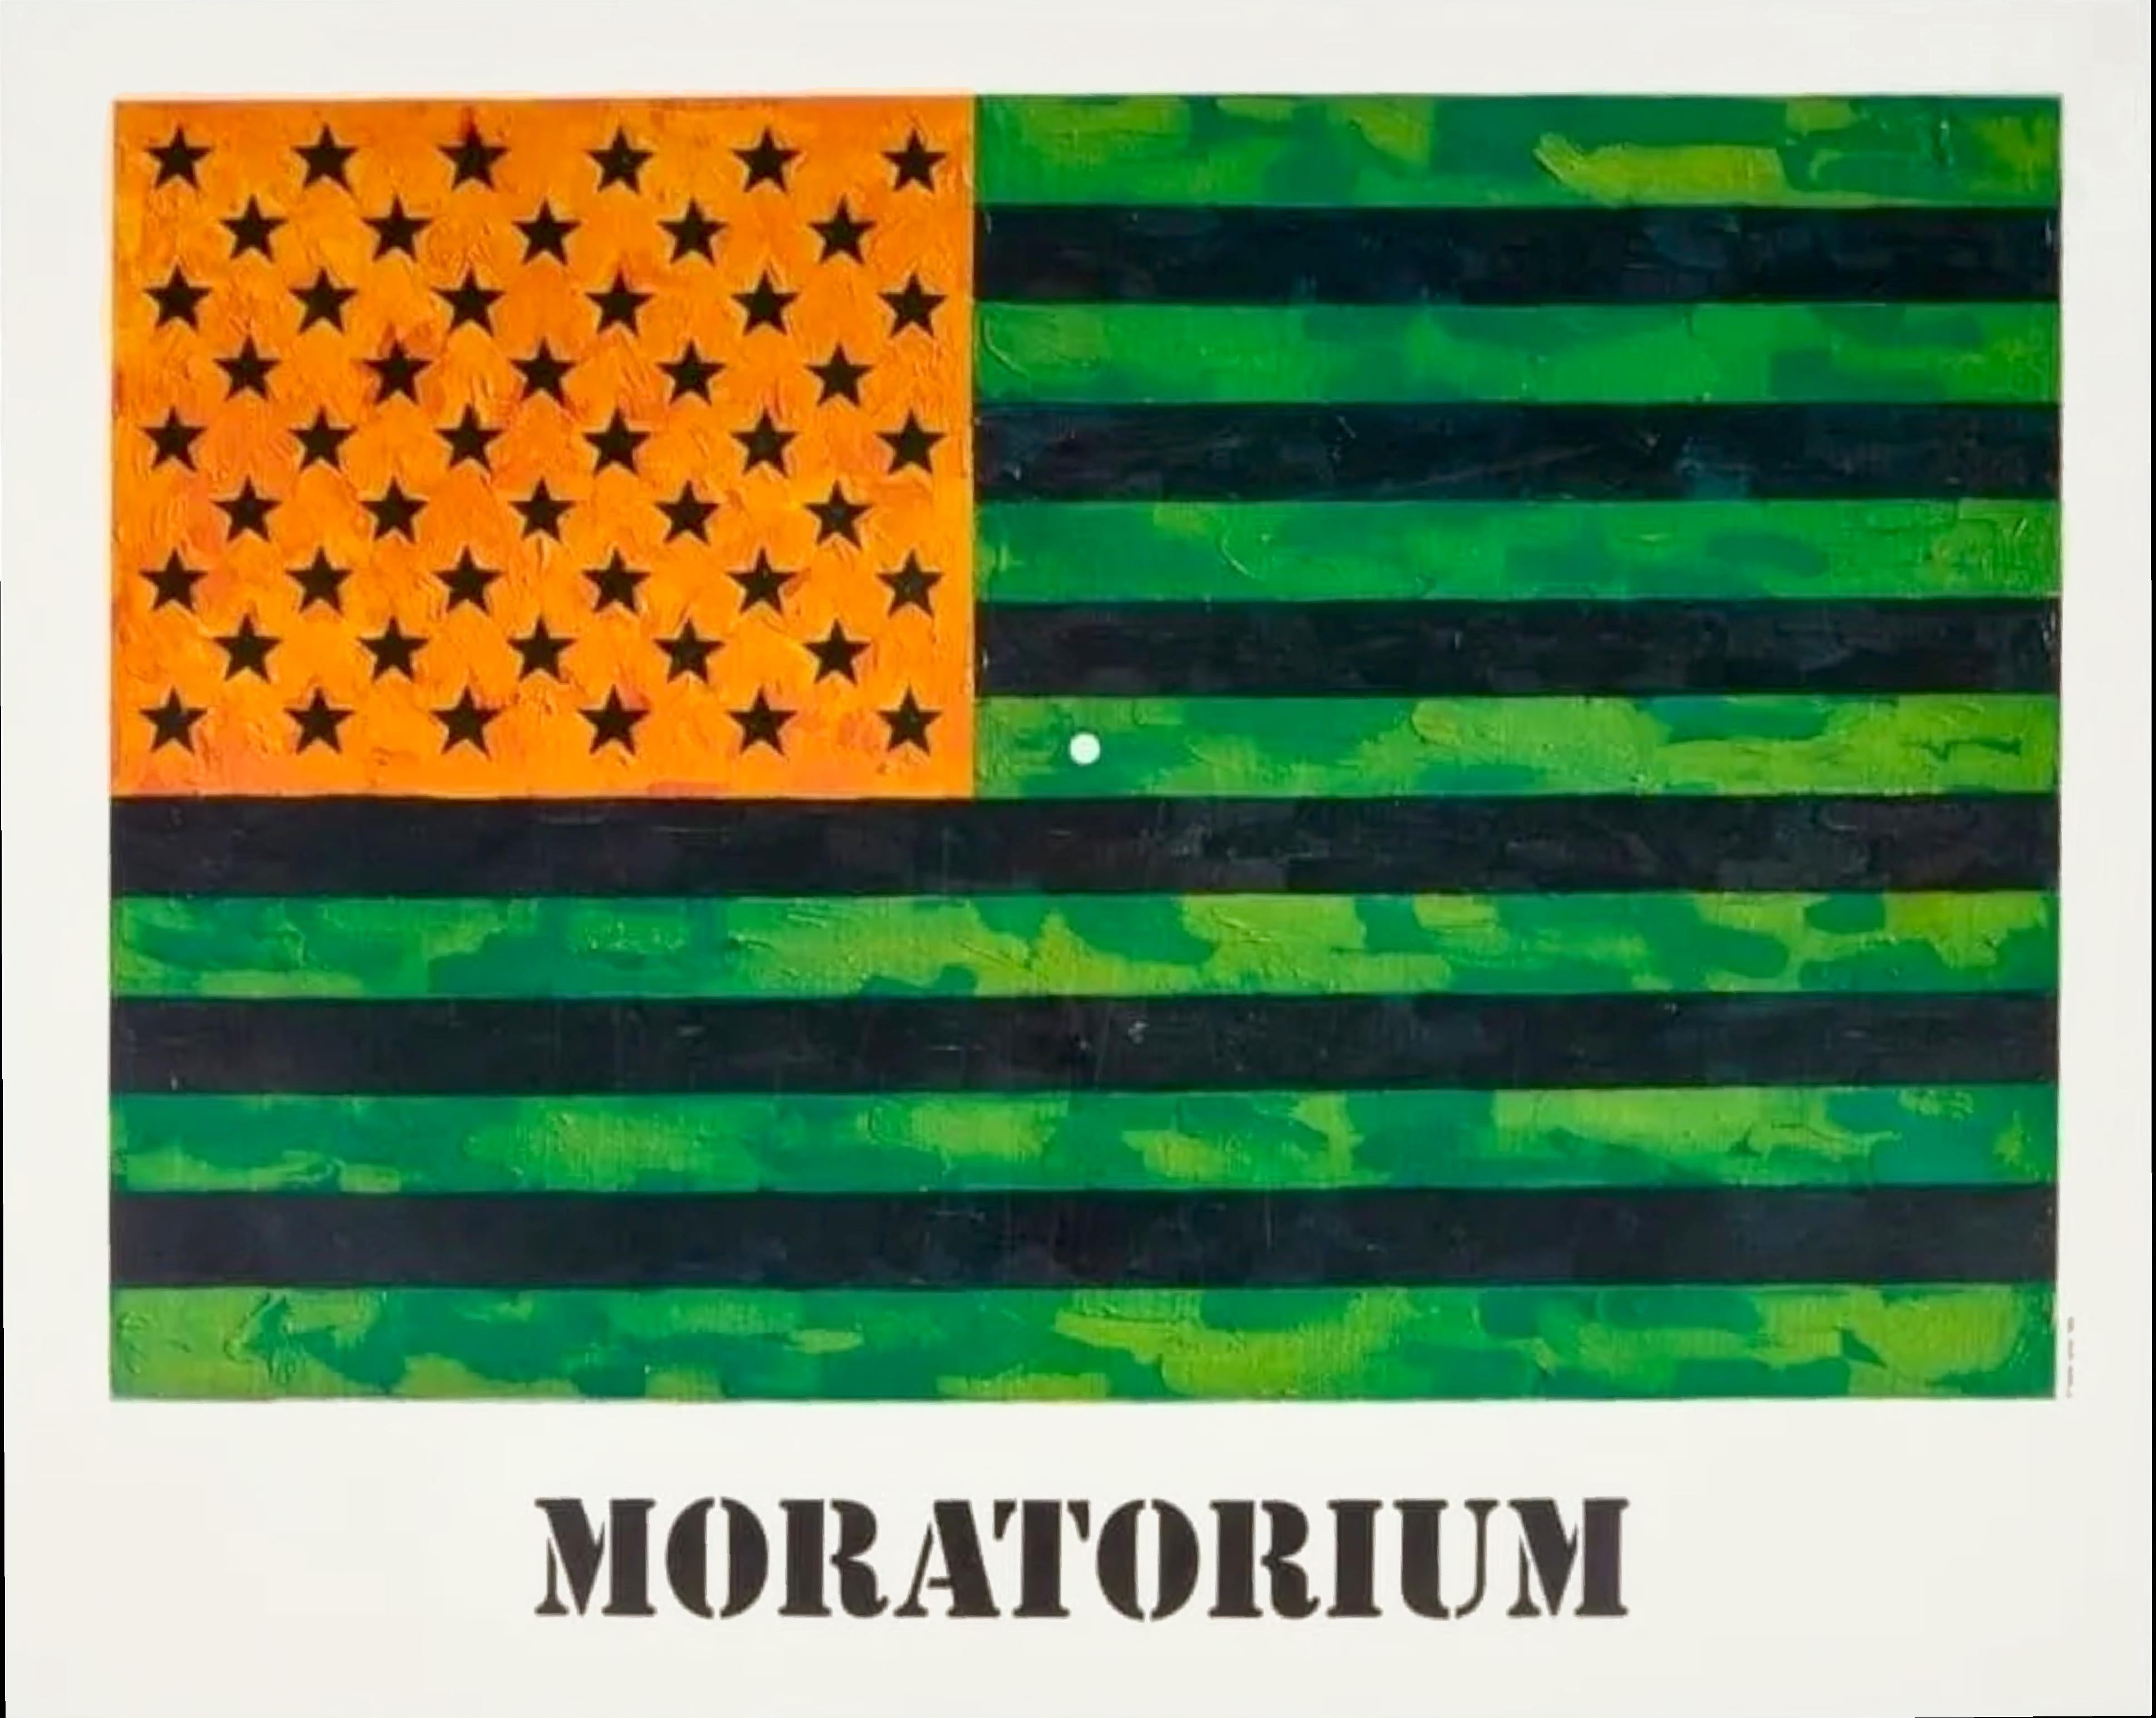 Moratorium (from the personal collection of Dennis Hopper), iconic anti-war art